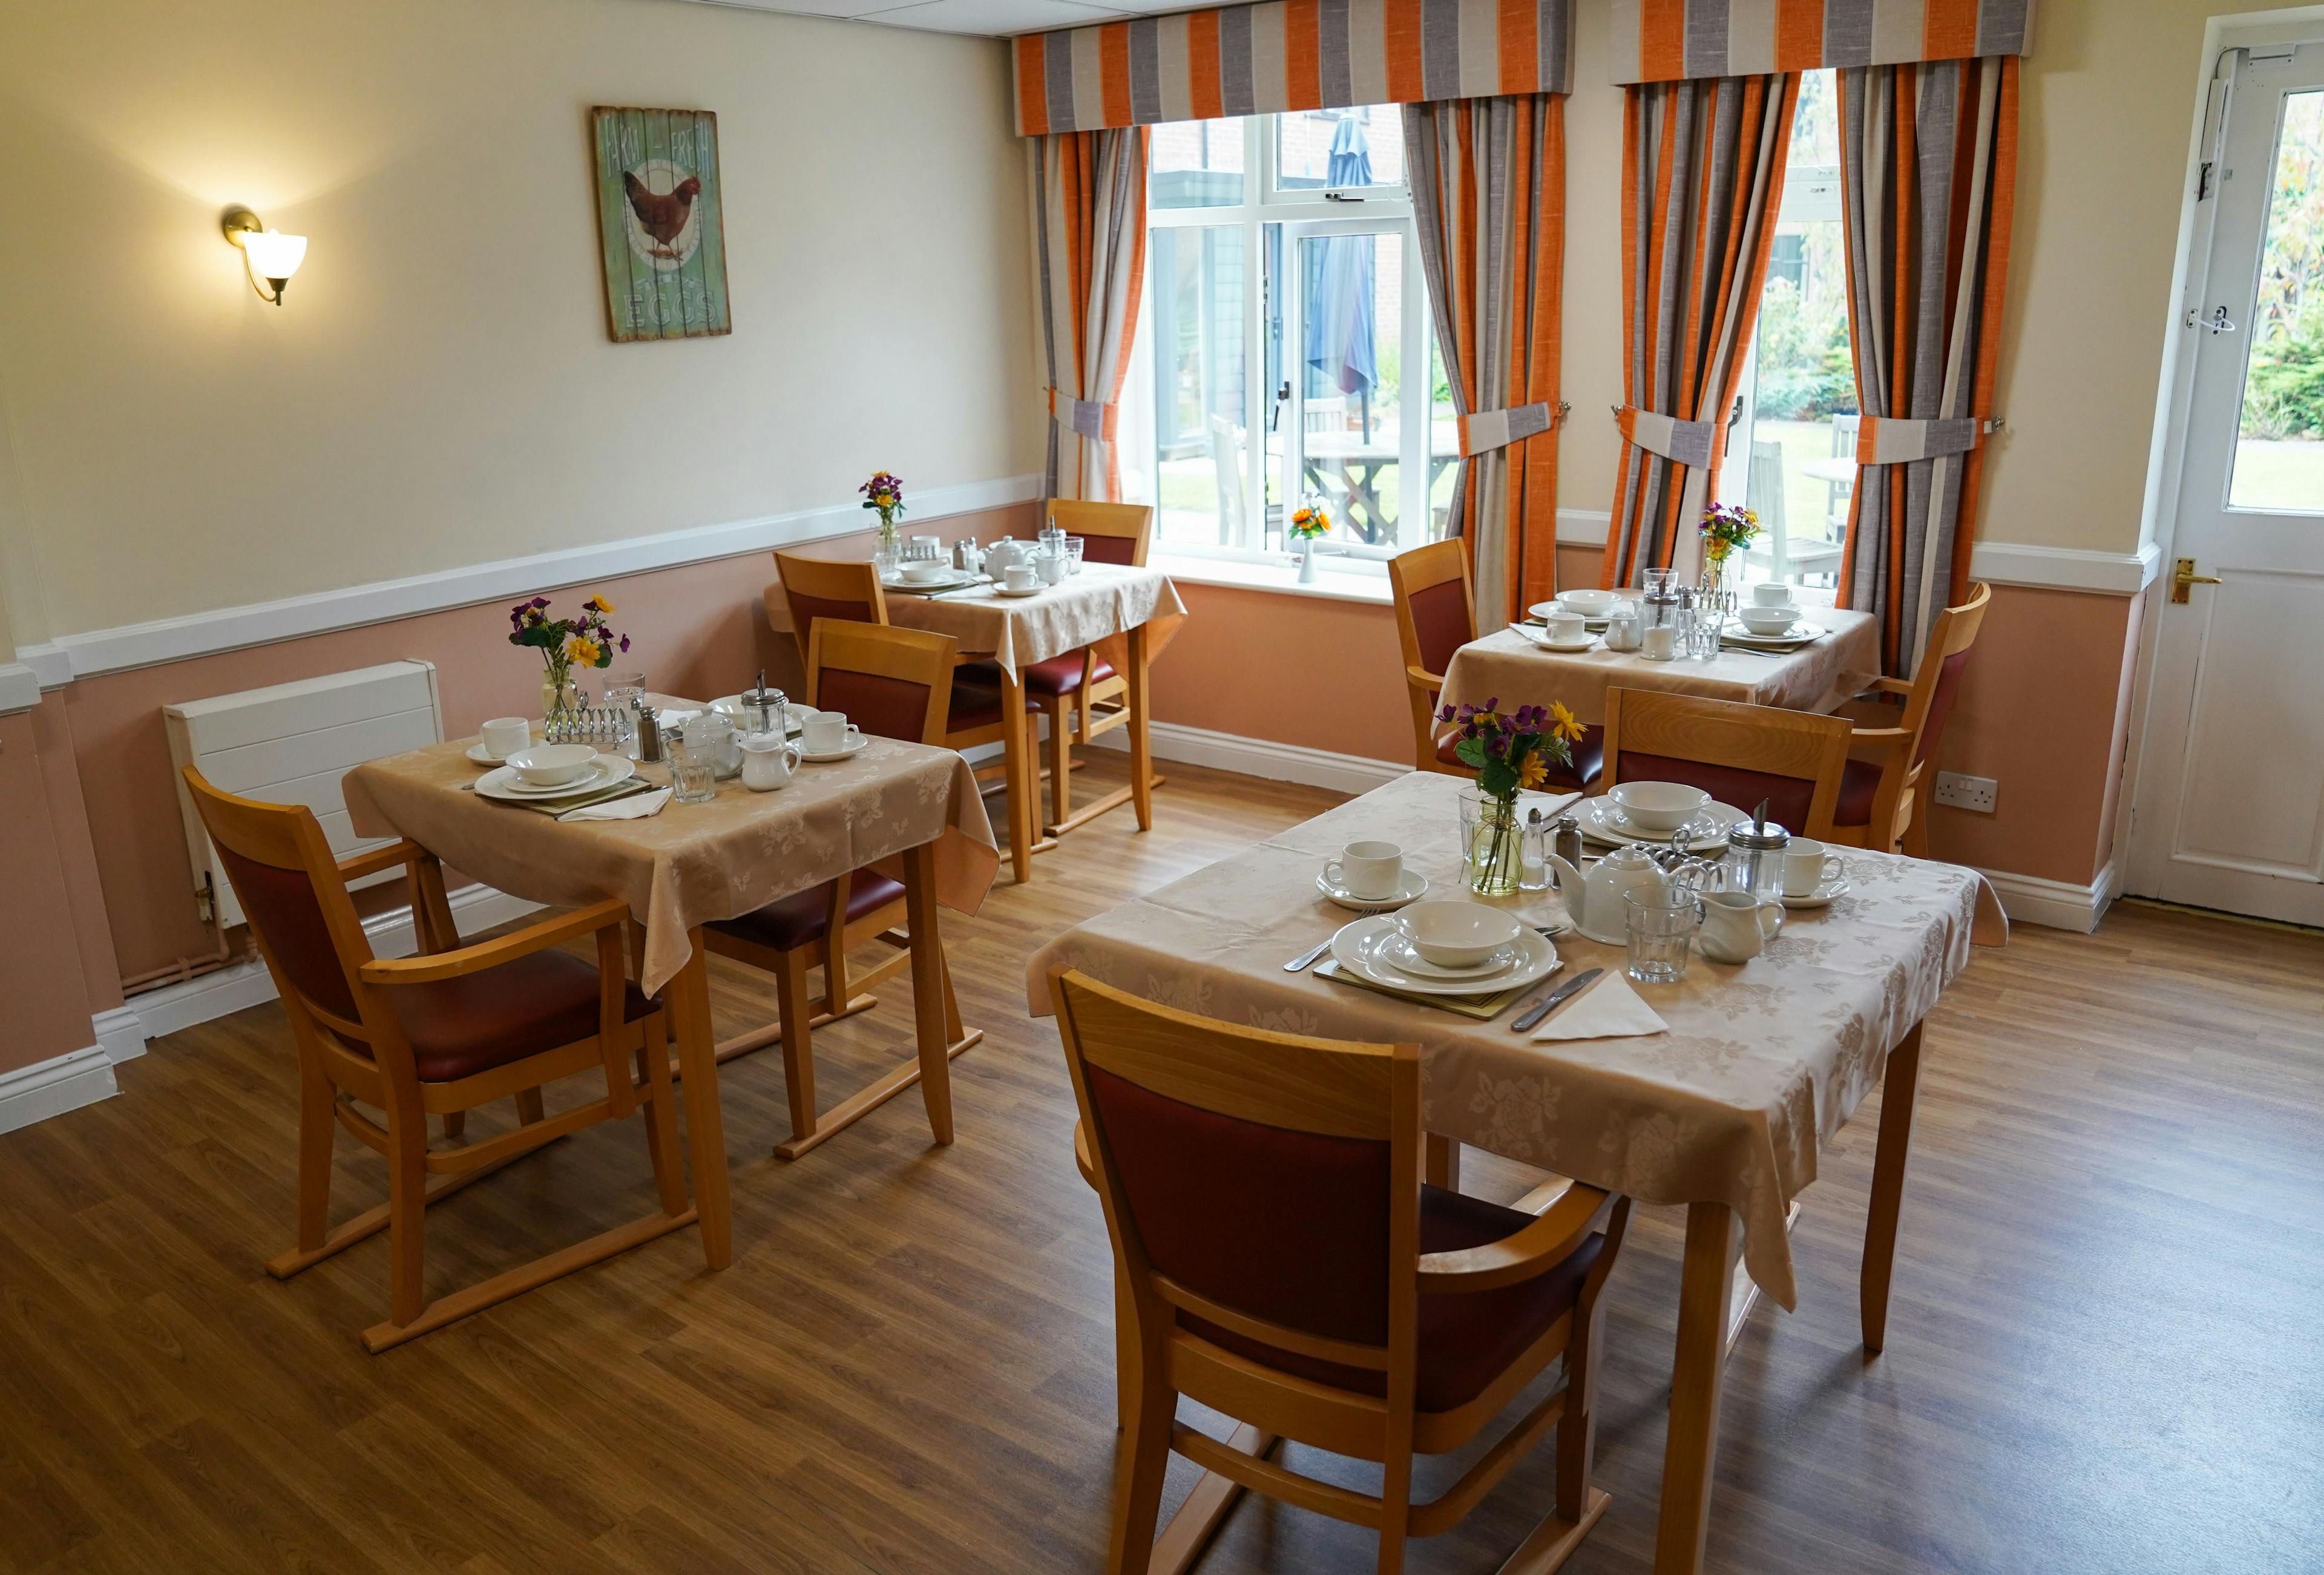 Dining Room at Dalby Court Care Home in Middlesborough, Yorkshire